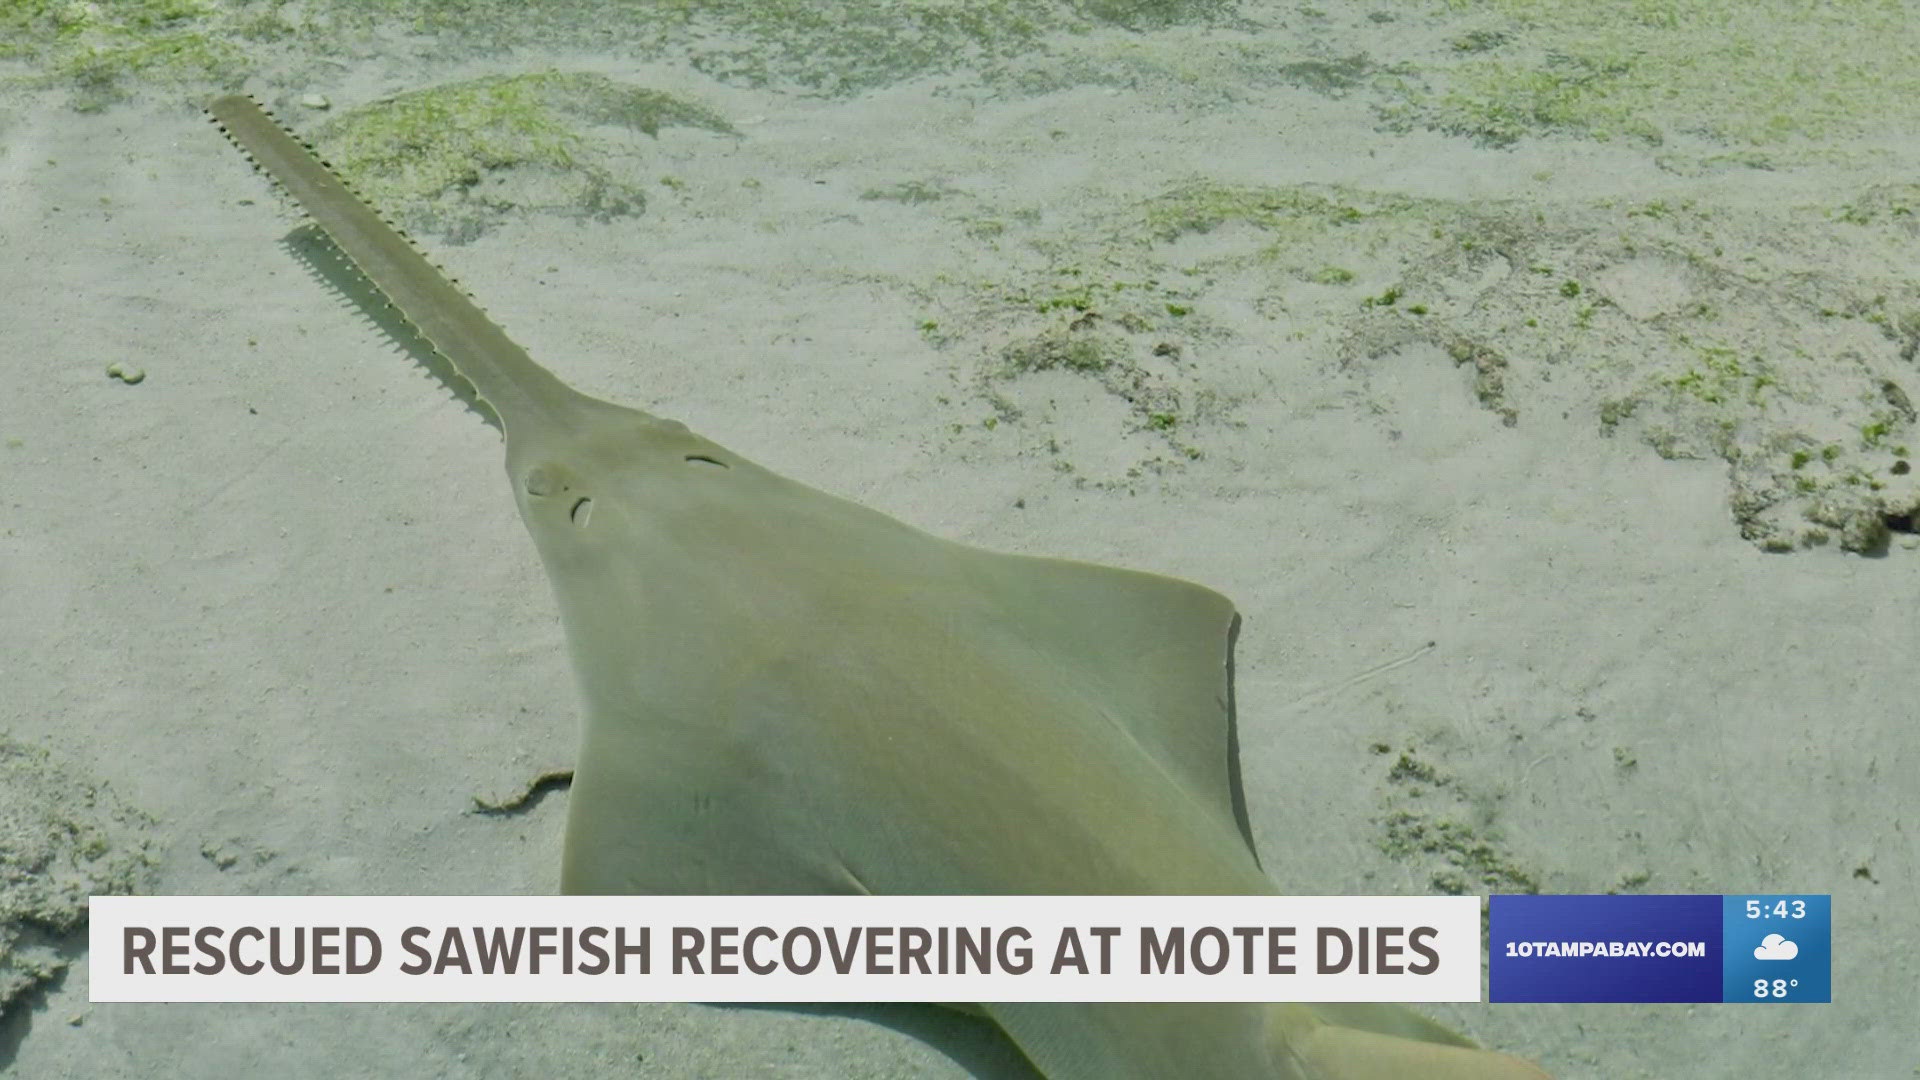 "Although heartbreaking, this outcome was not surprising," an official with Mote Marine Laboratory and Aquarium said.